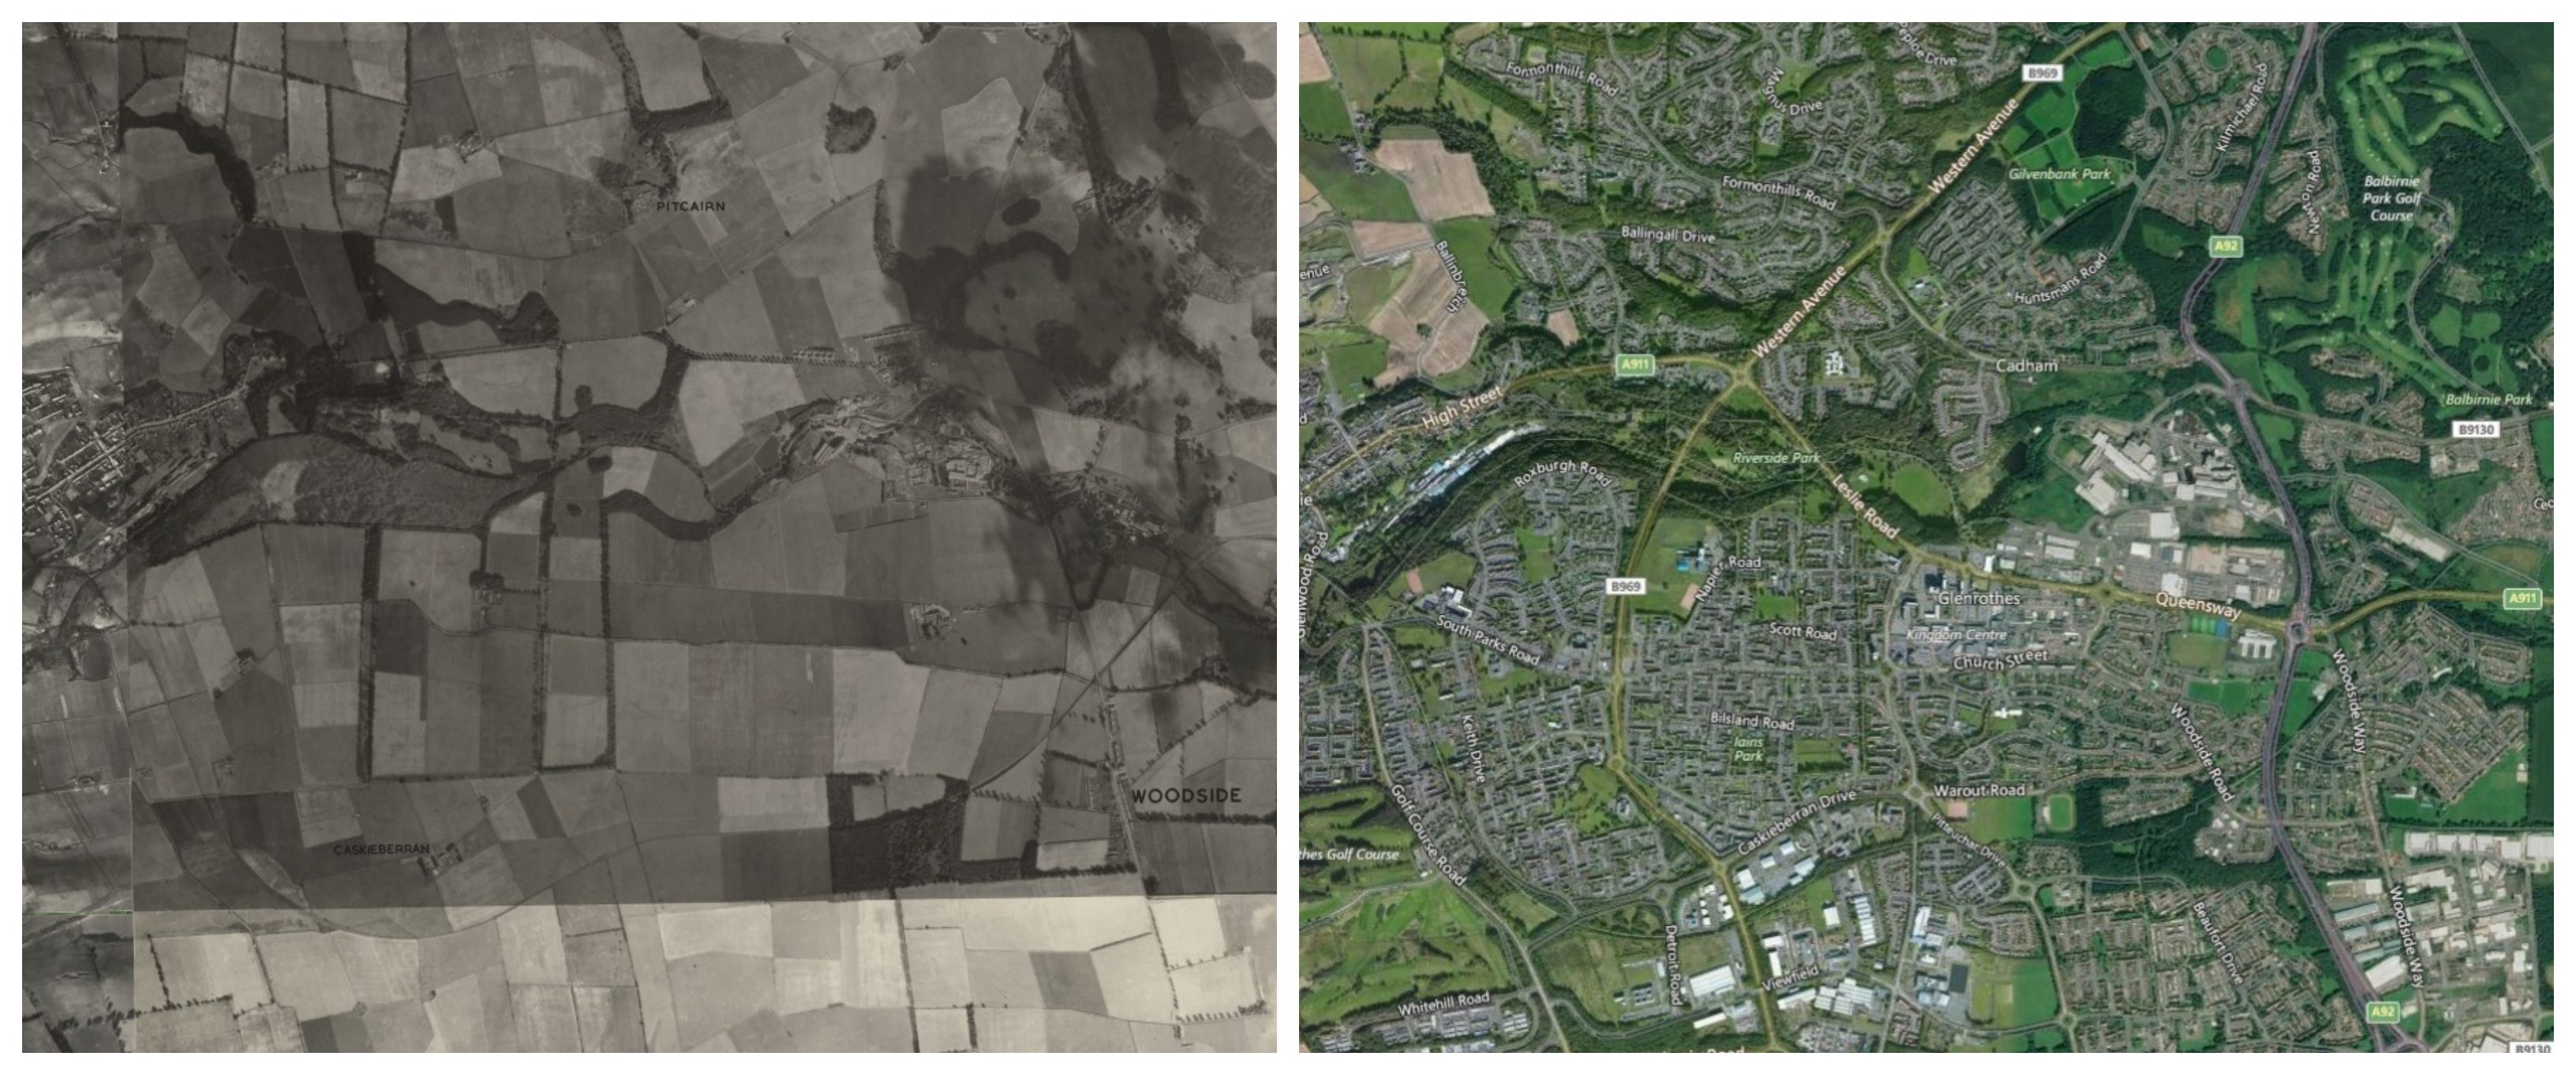 Before Glenrothes was built in the 1940s and how the town looks today.